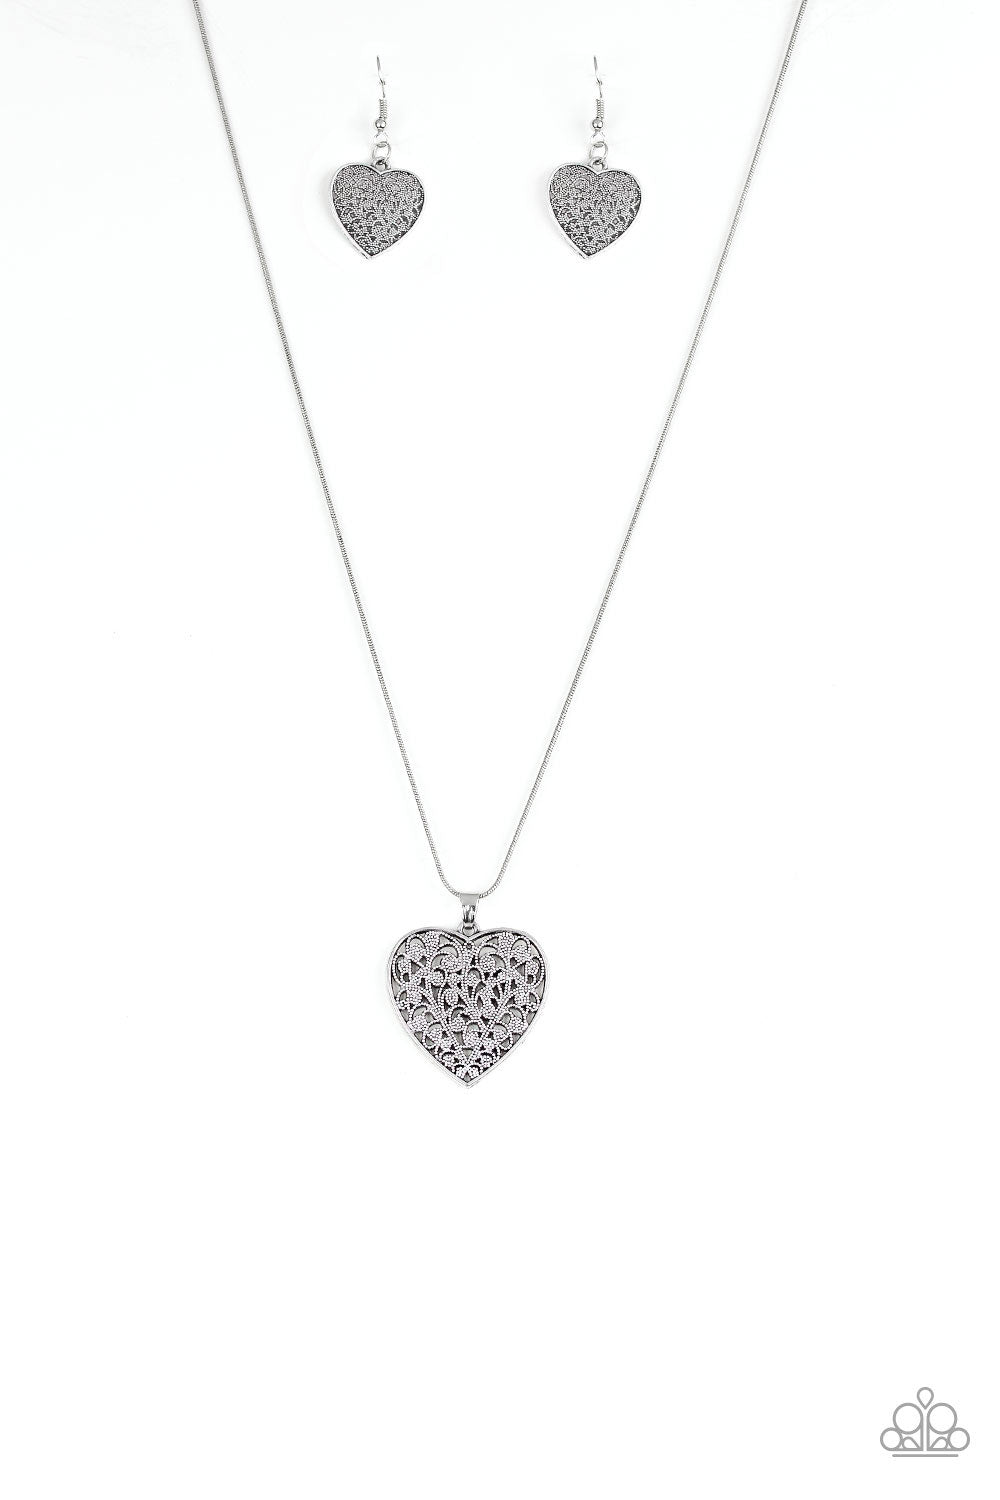 Look Into Your Heart Silver Filigree Heart Necklace - Paparazzi Accessories - lightbox -CarasShop.com - $5 Jewelry by Cara Jewels